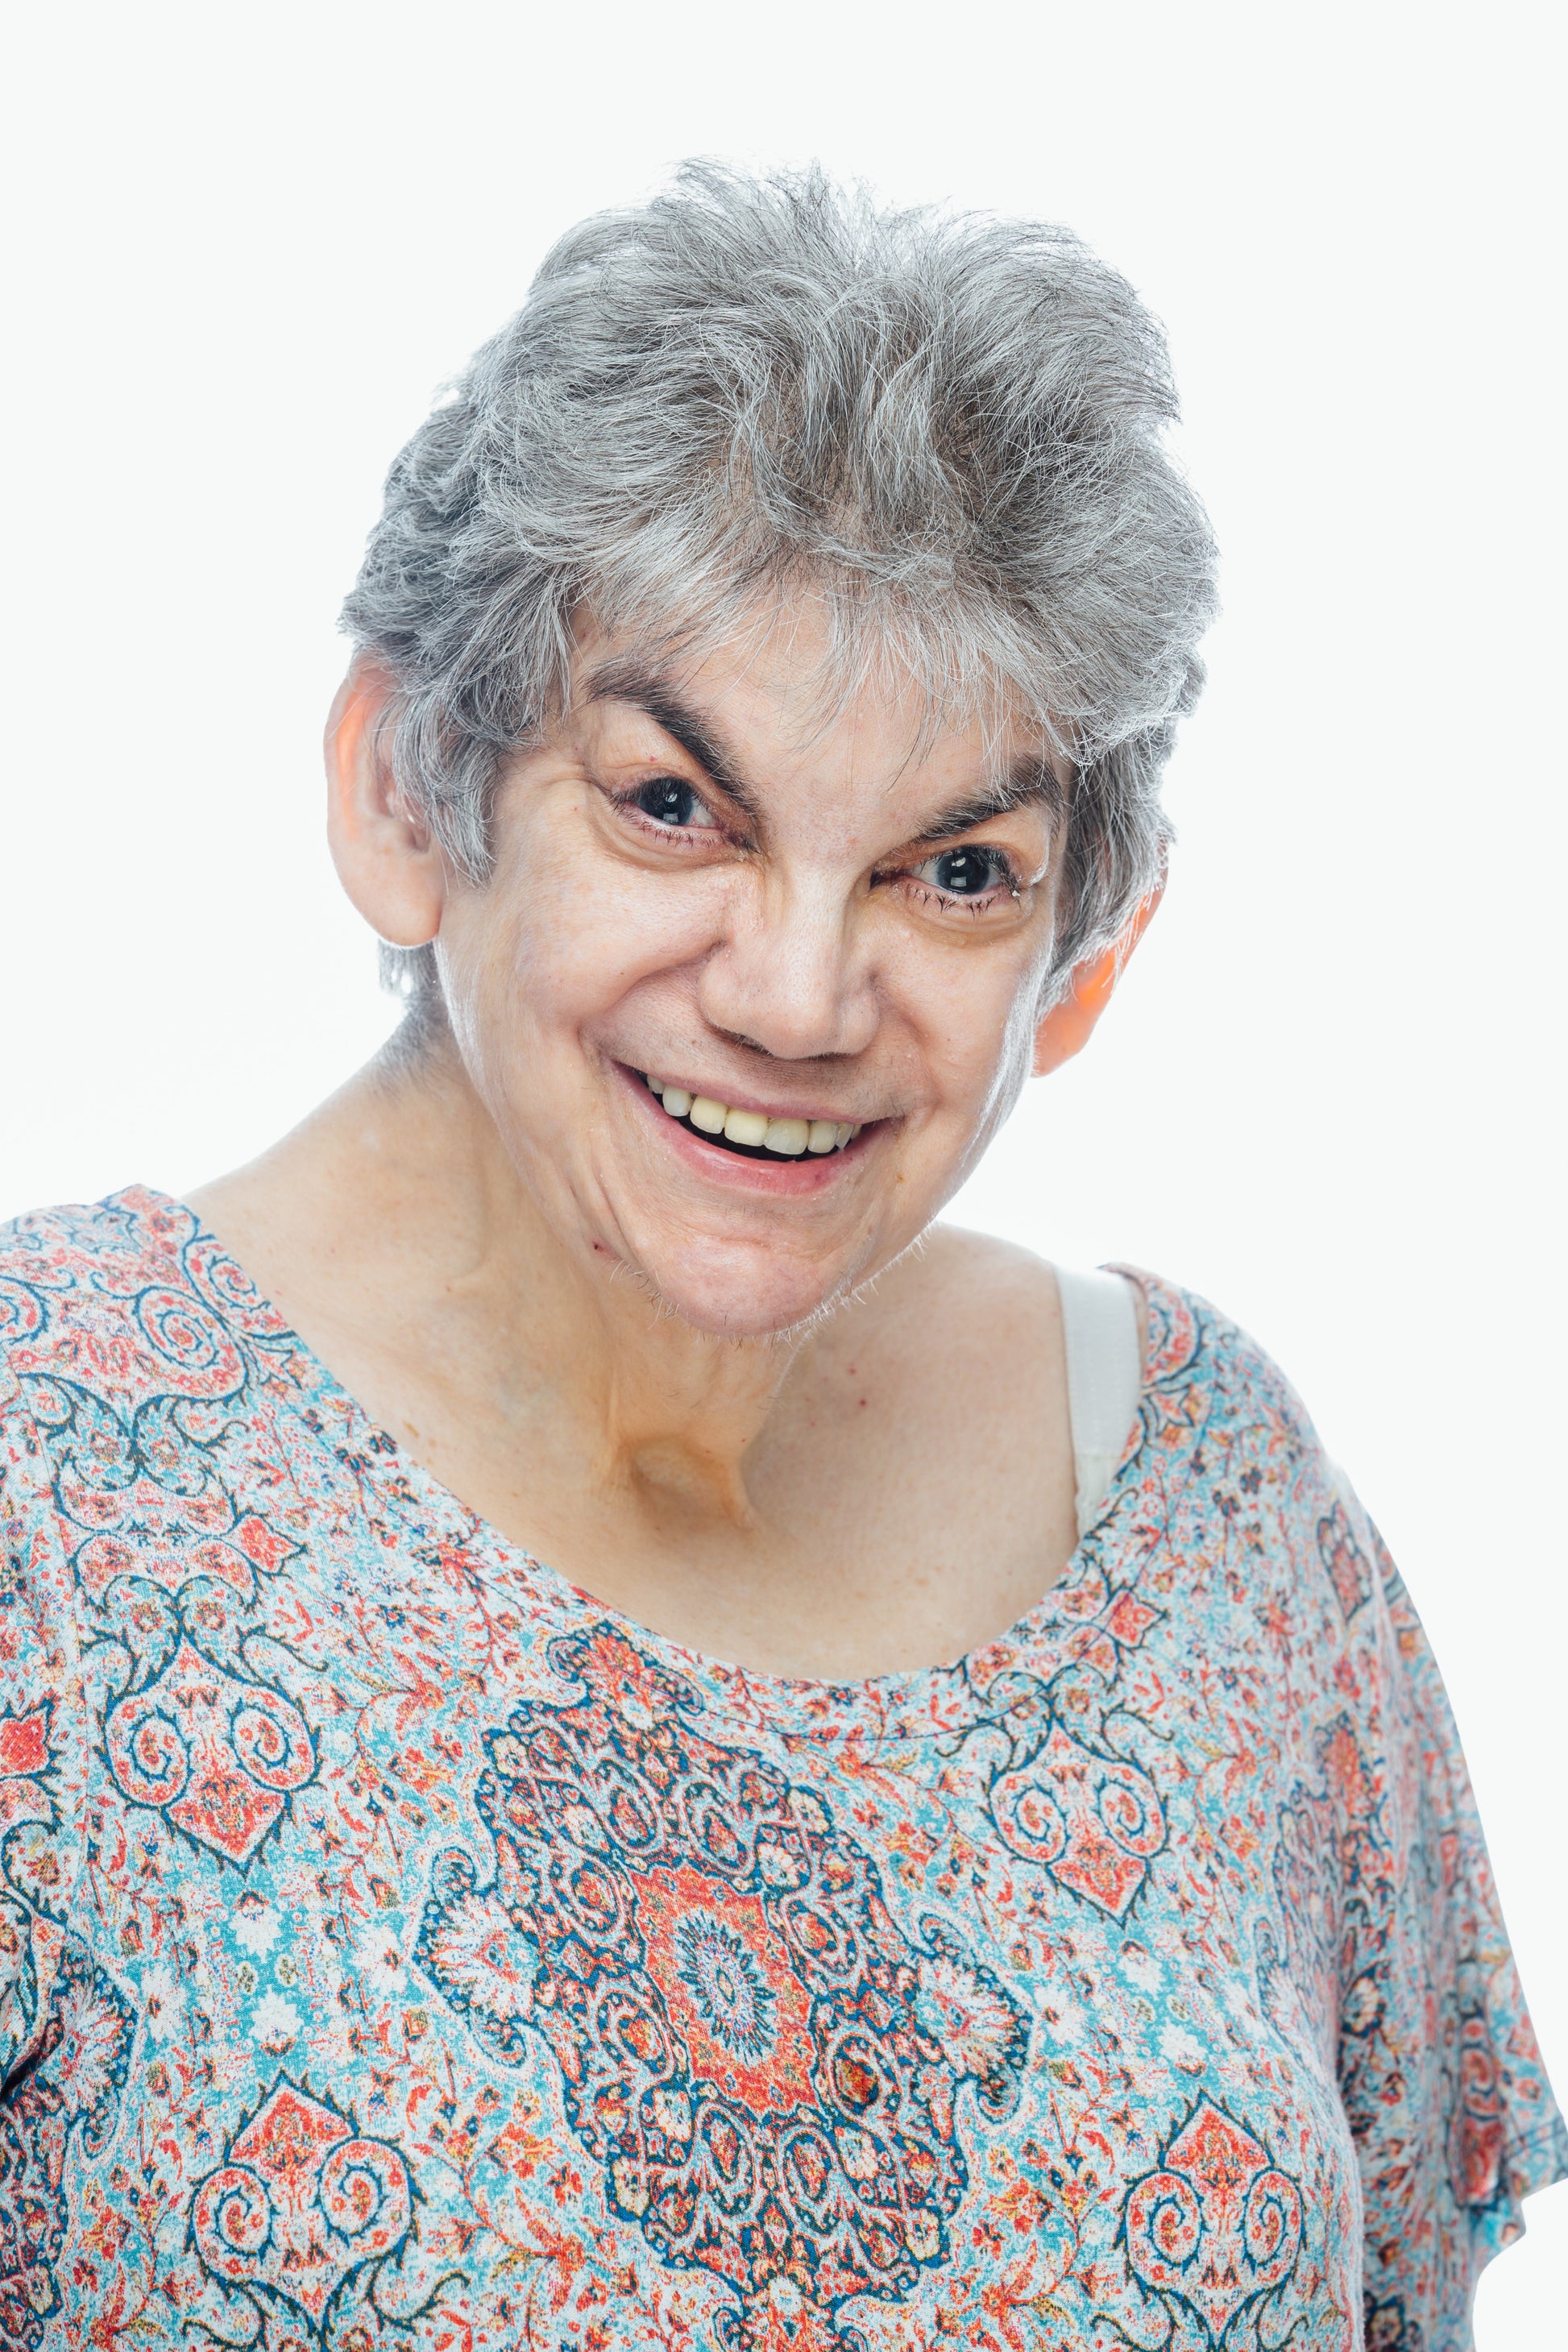 Smiling woman with gray hair and multi colored blouse